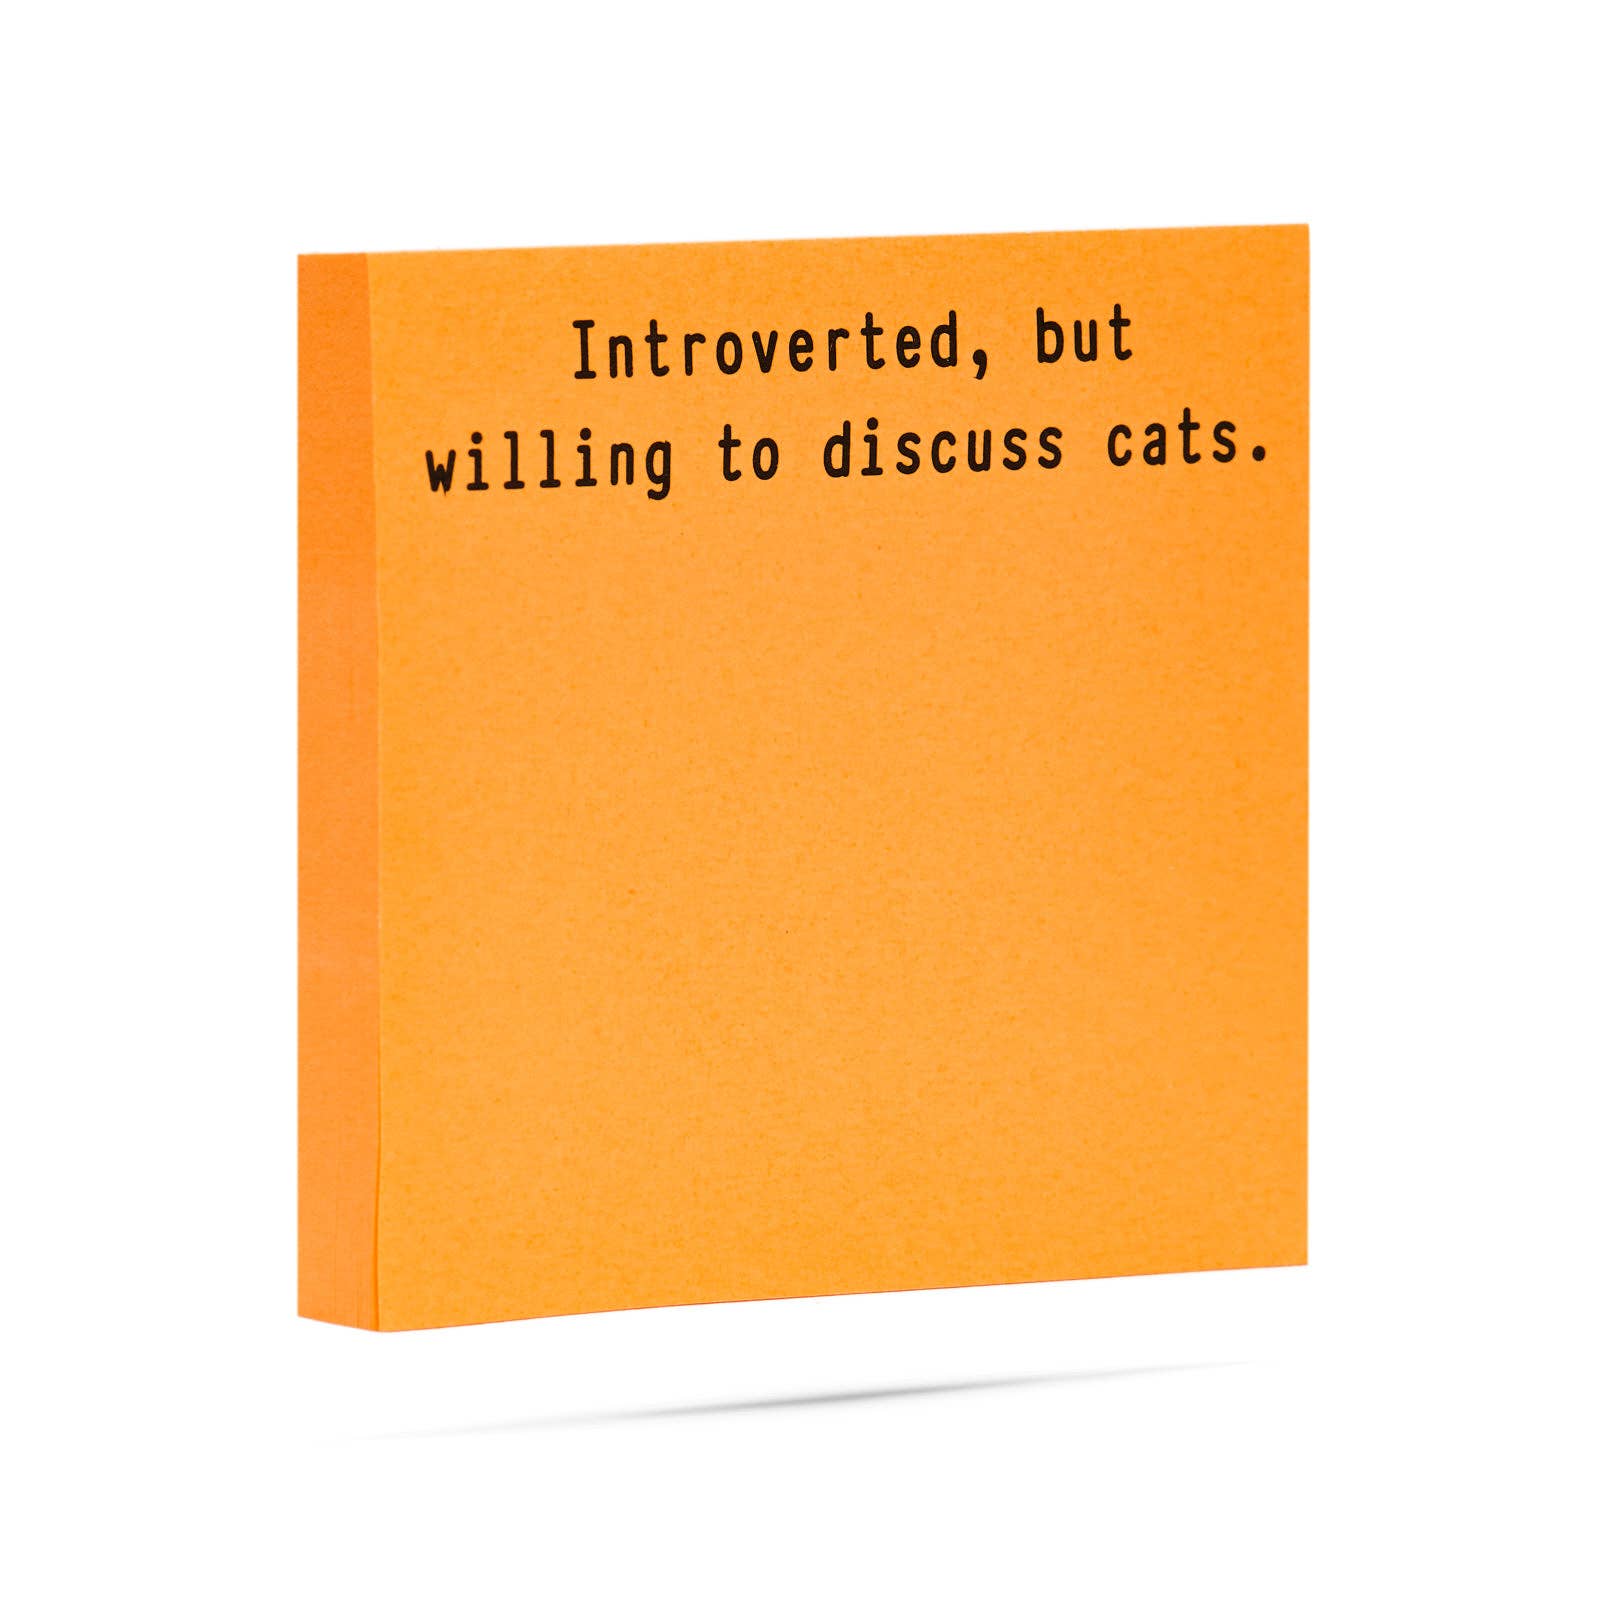 Introverted, but willing to discuss cats | sticky note pads